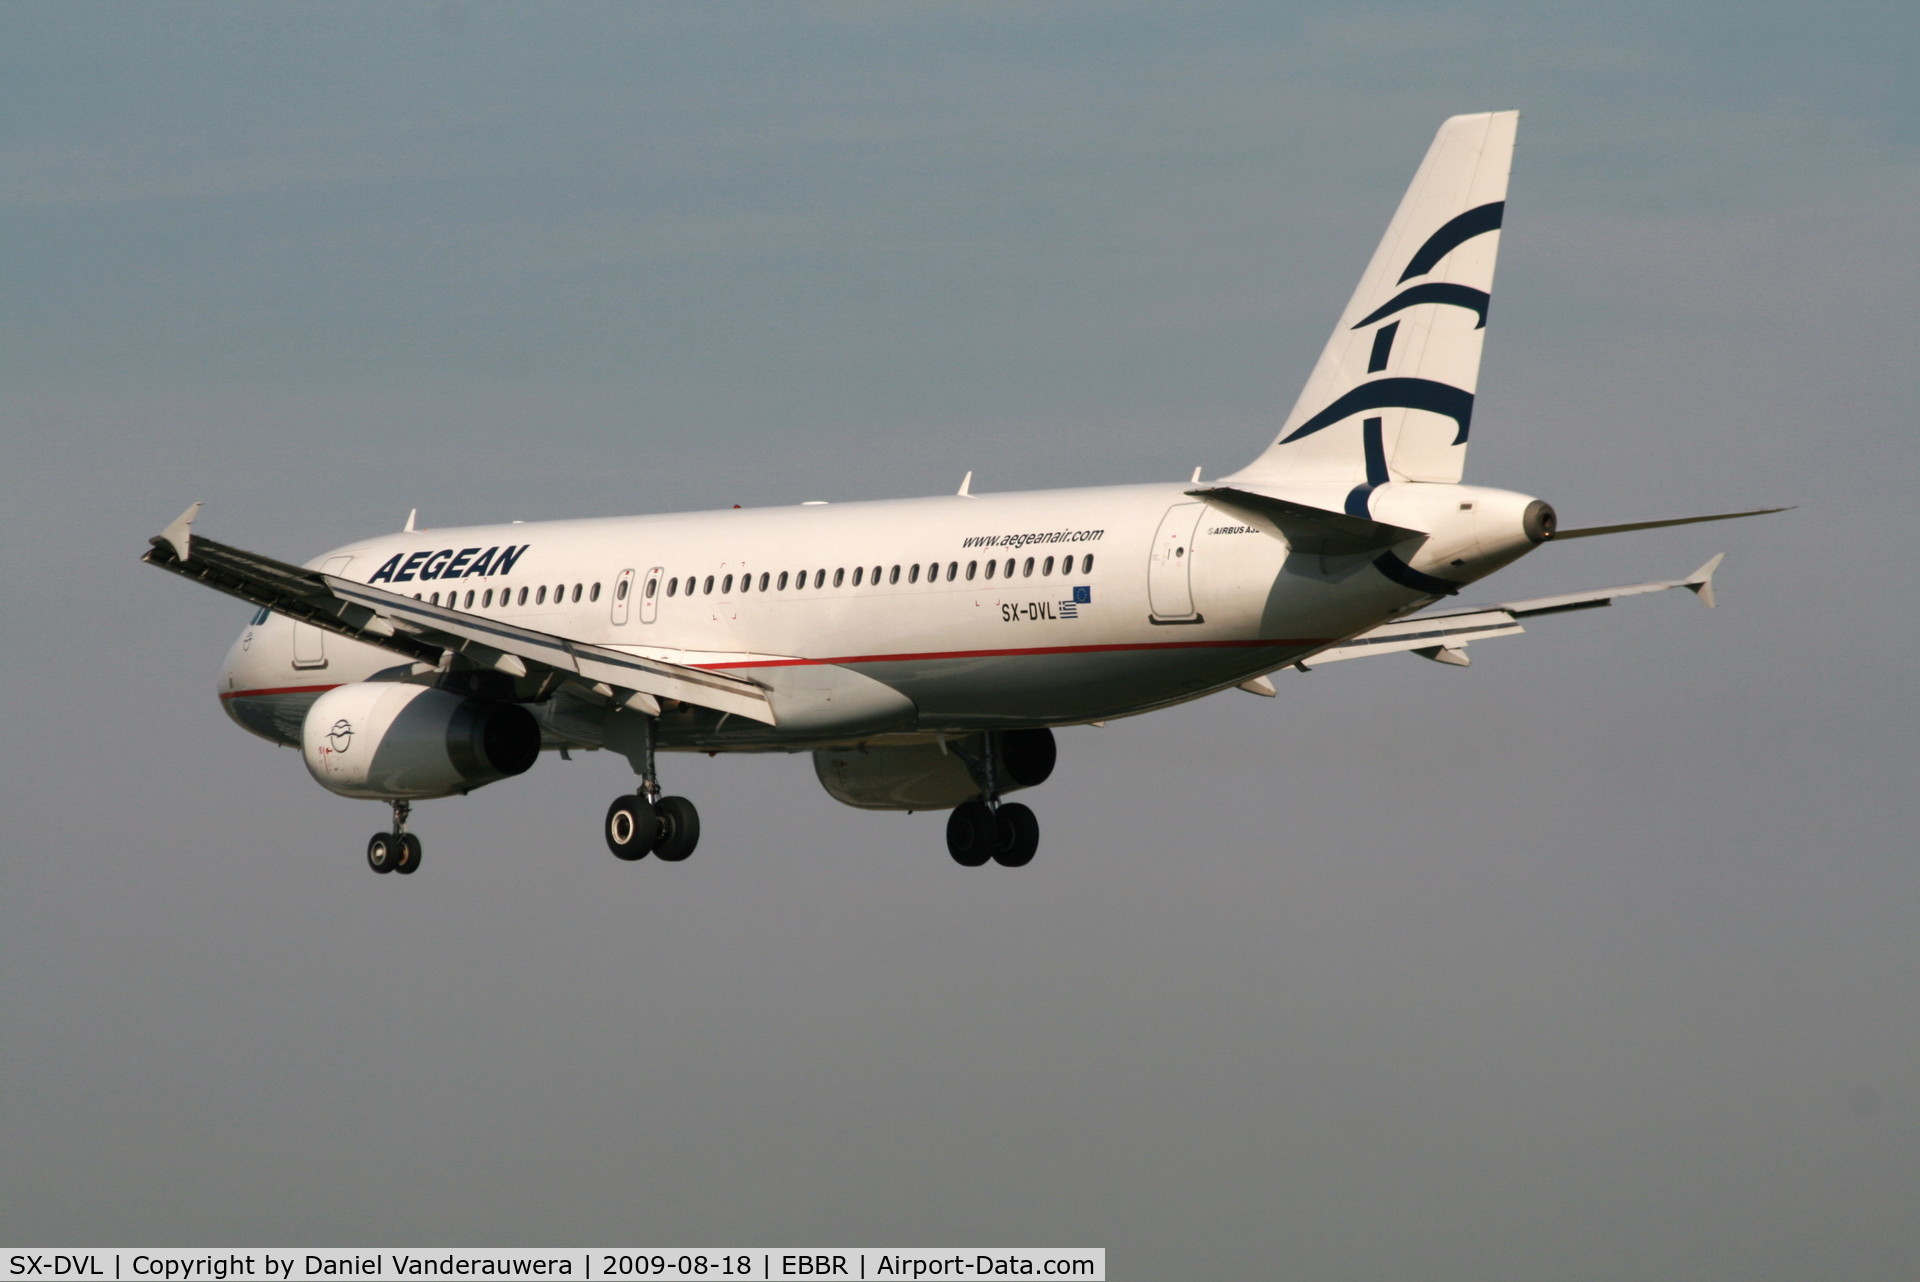 SX-DVL, 2008 Airbus A320-232 C/N 3423, several seconds before landing on rwy 25L